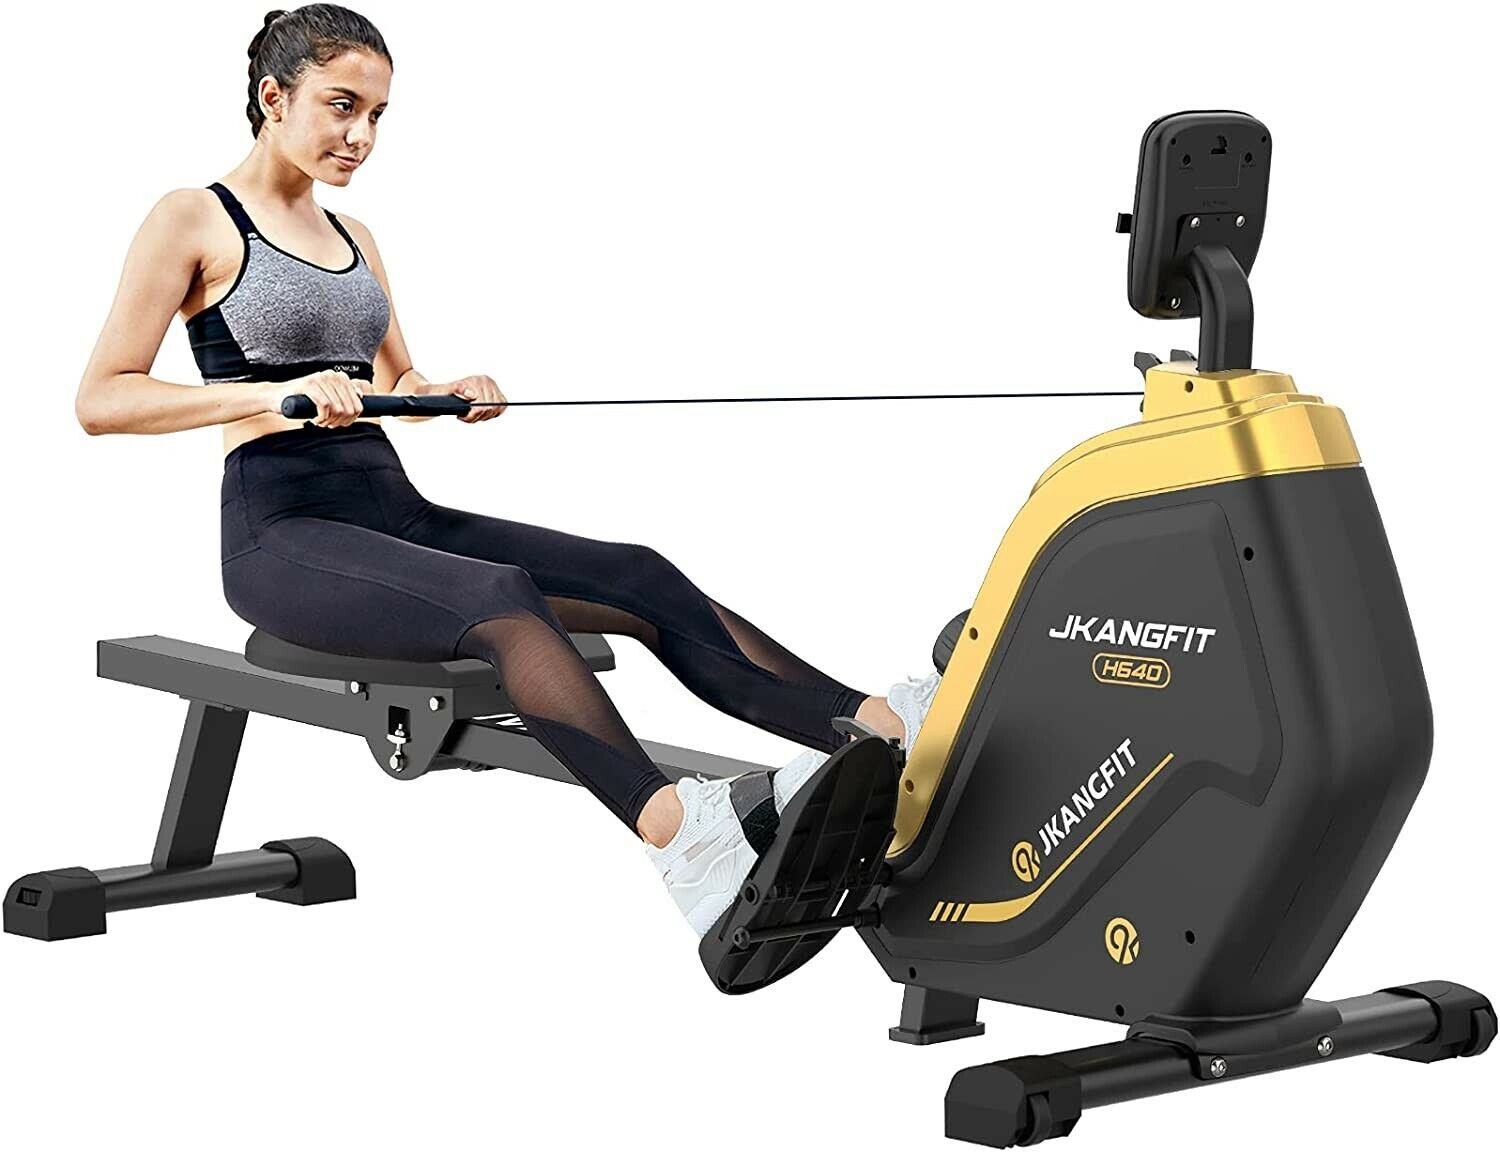 Indoor Magnetic Row Rowing Machine Rower Cardio Home Gym Exercise Equipment New